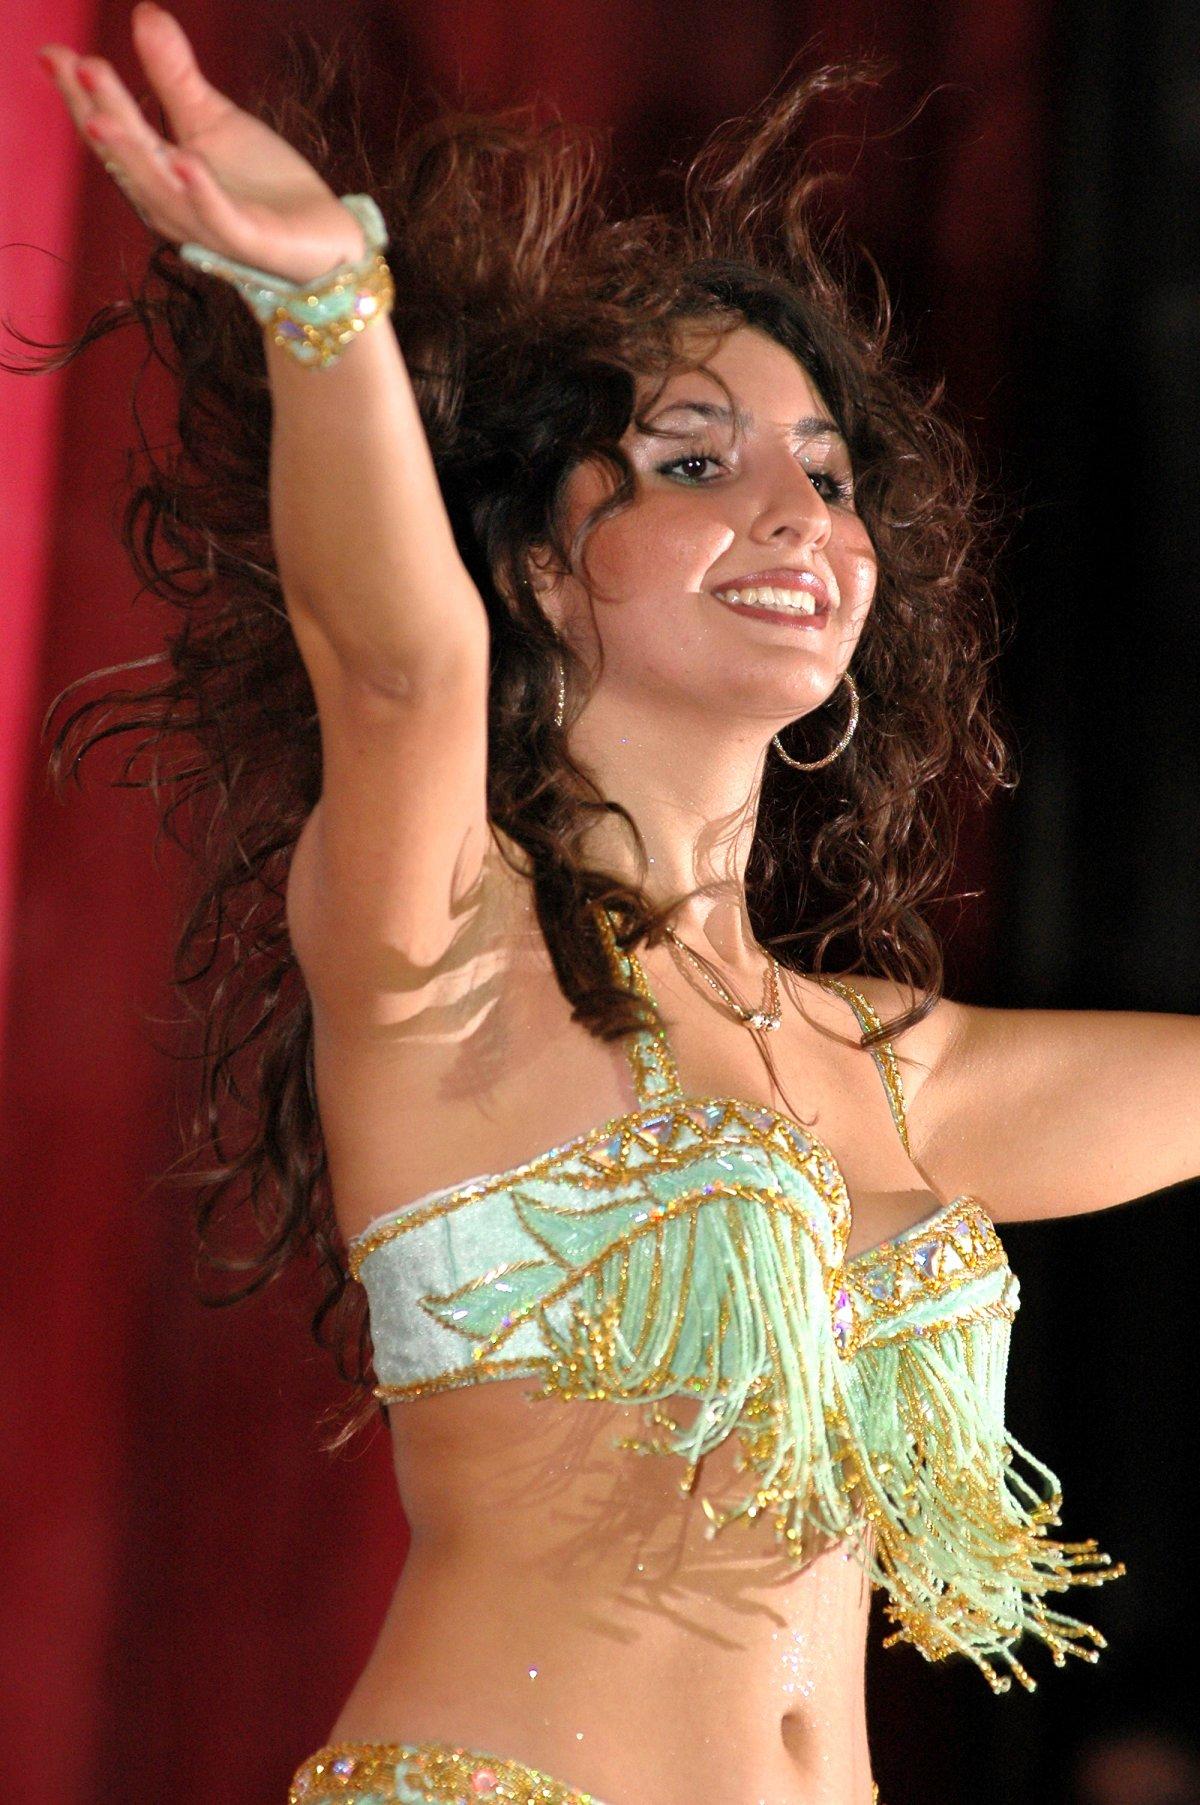 https://takelessons.com/blog/2020/04/how-to-belly-dance-for-beginners